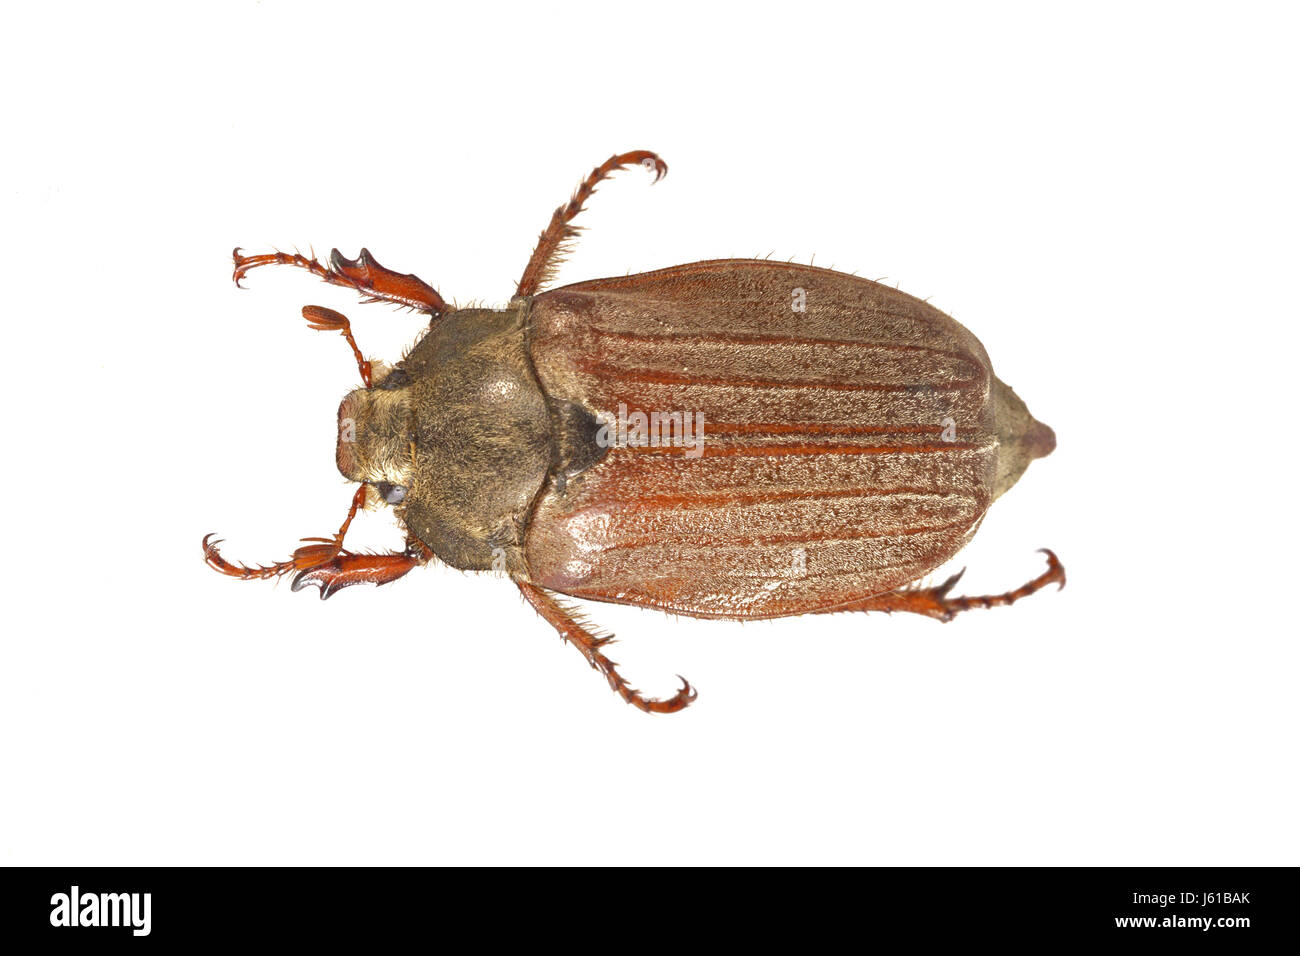 Cockchafer or May bug (Melolontha melolontha) isolated on a white background Stock Photo